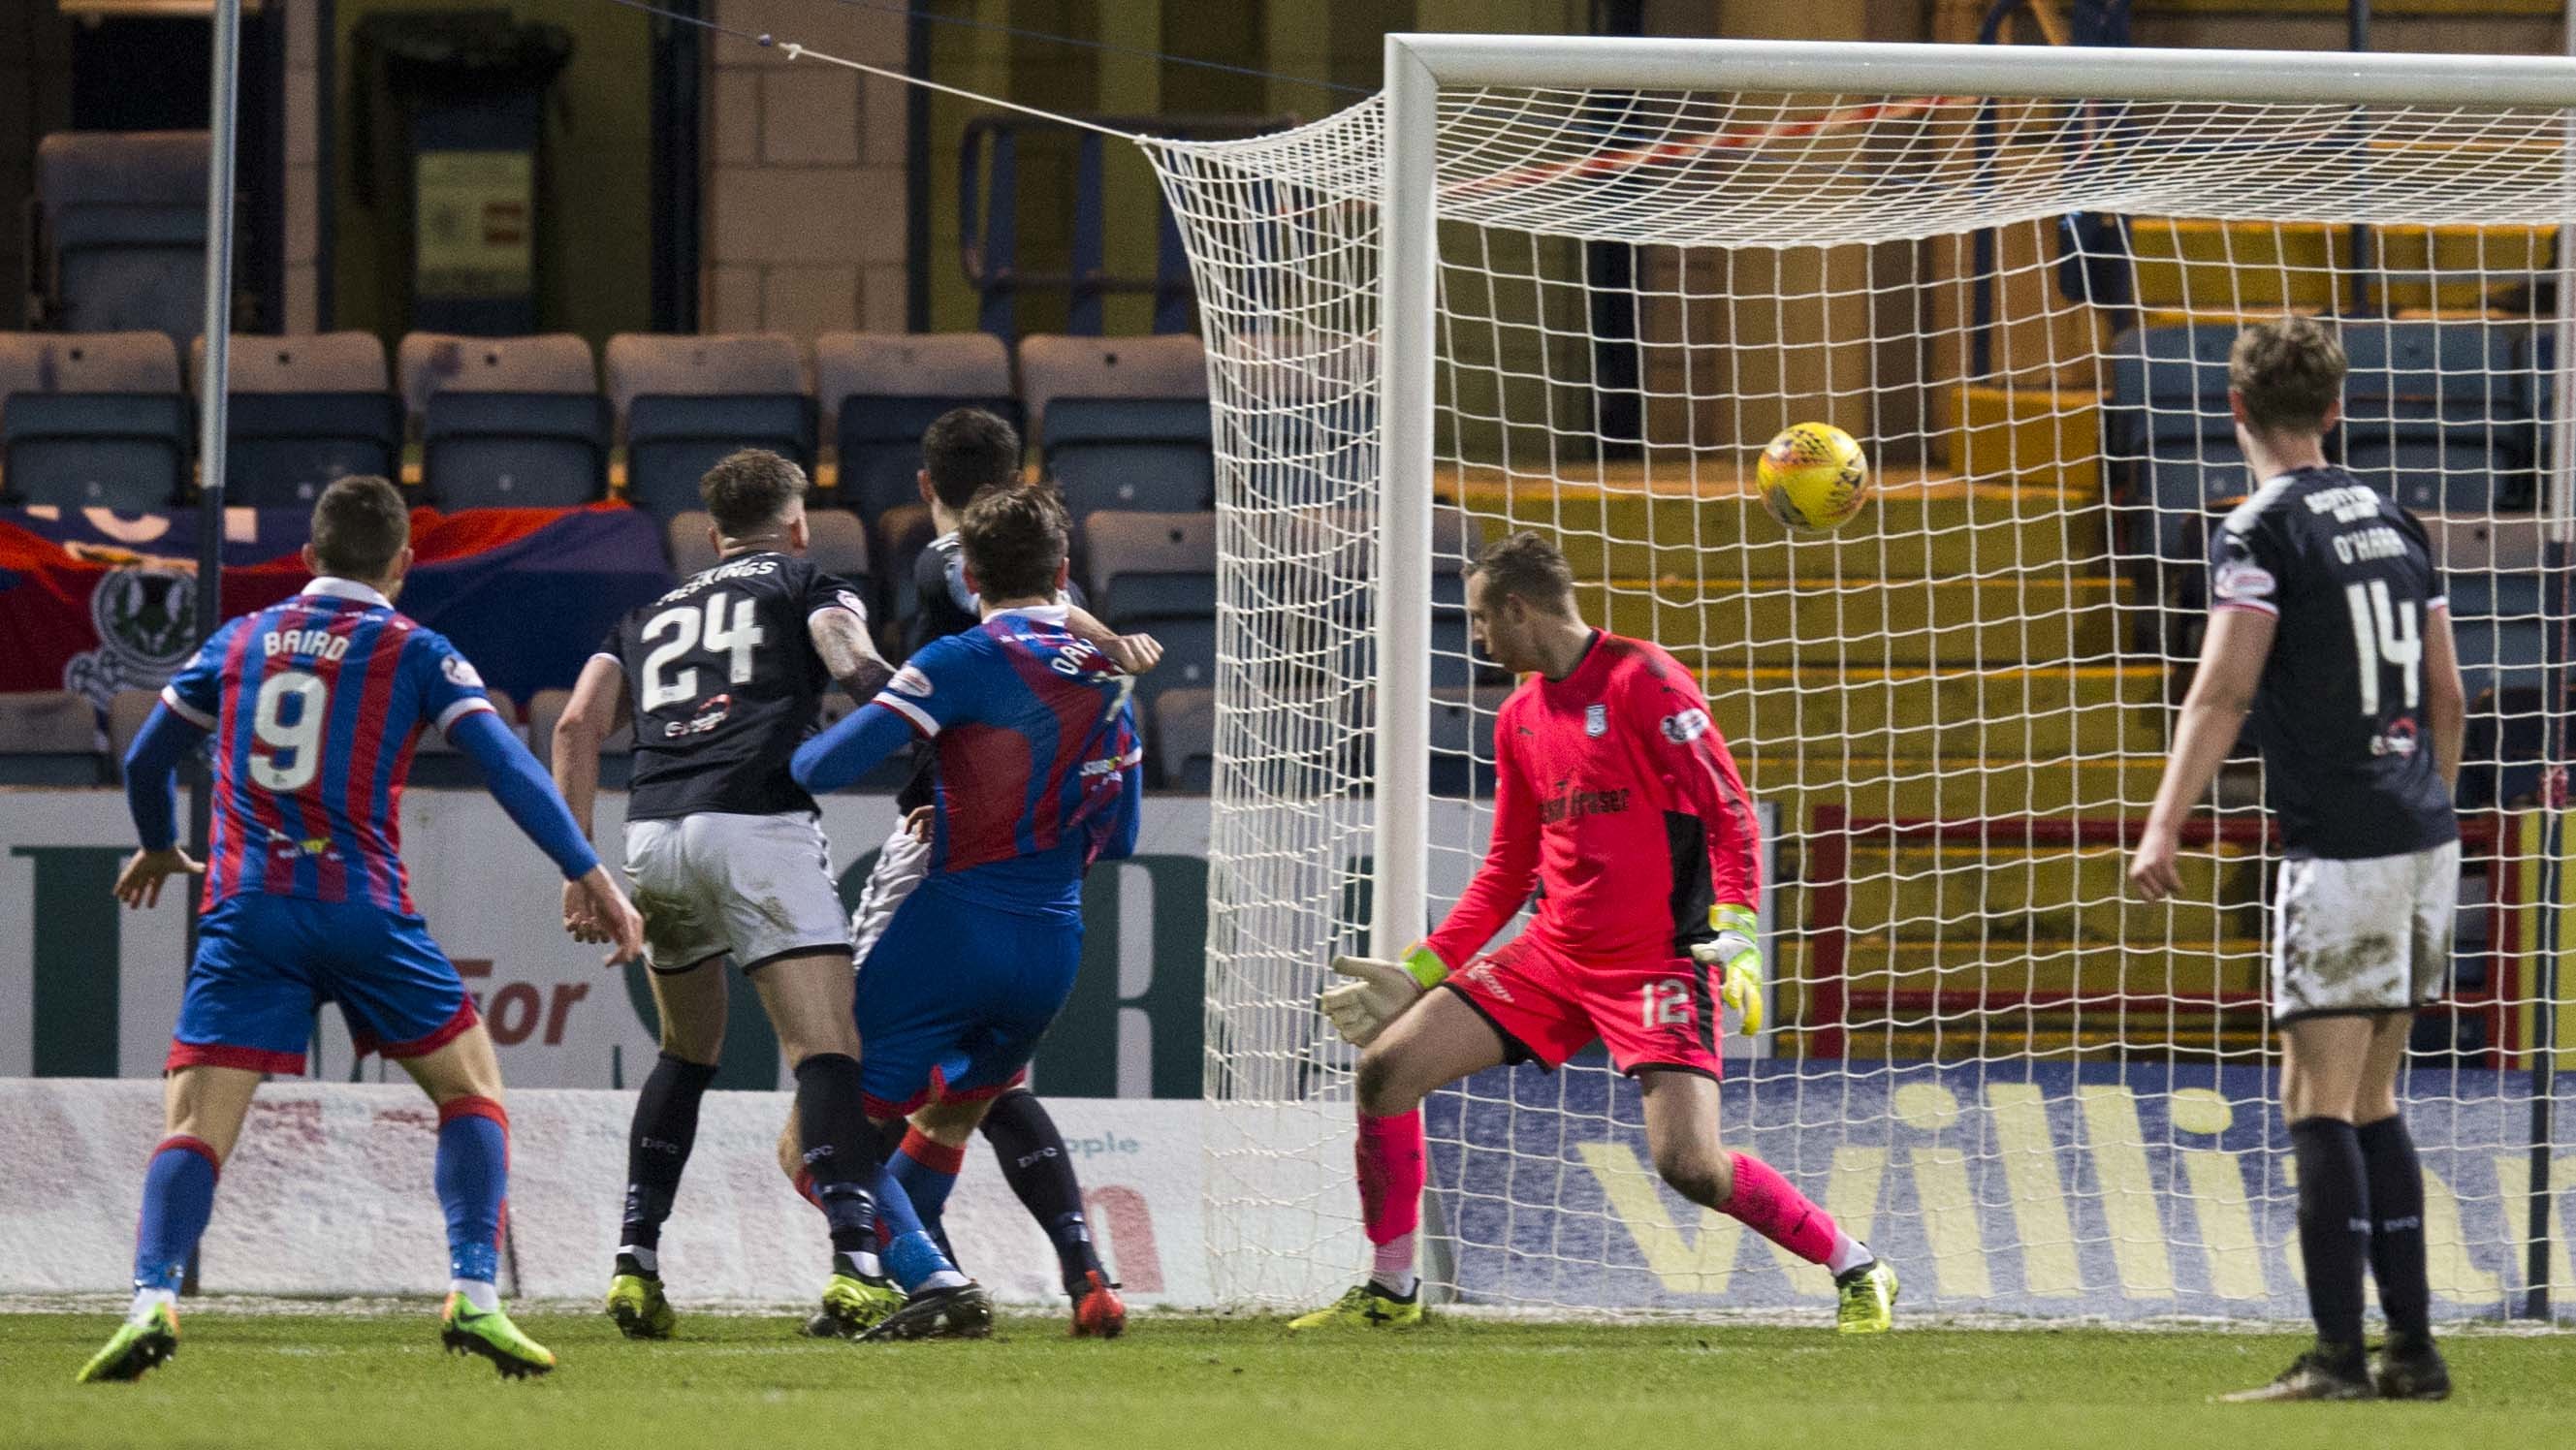 The fan died after initially being treated during Dundee FC's match against Inverness Caledonian Thistle.